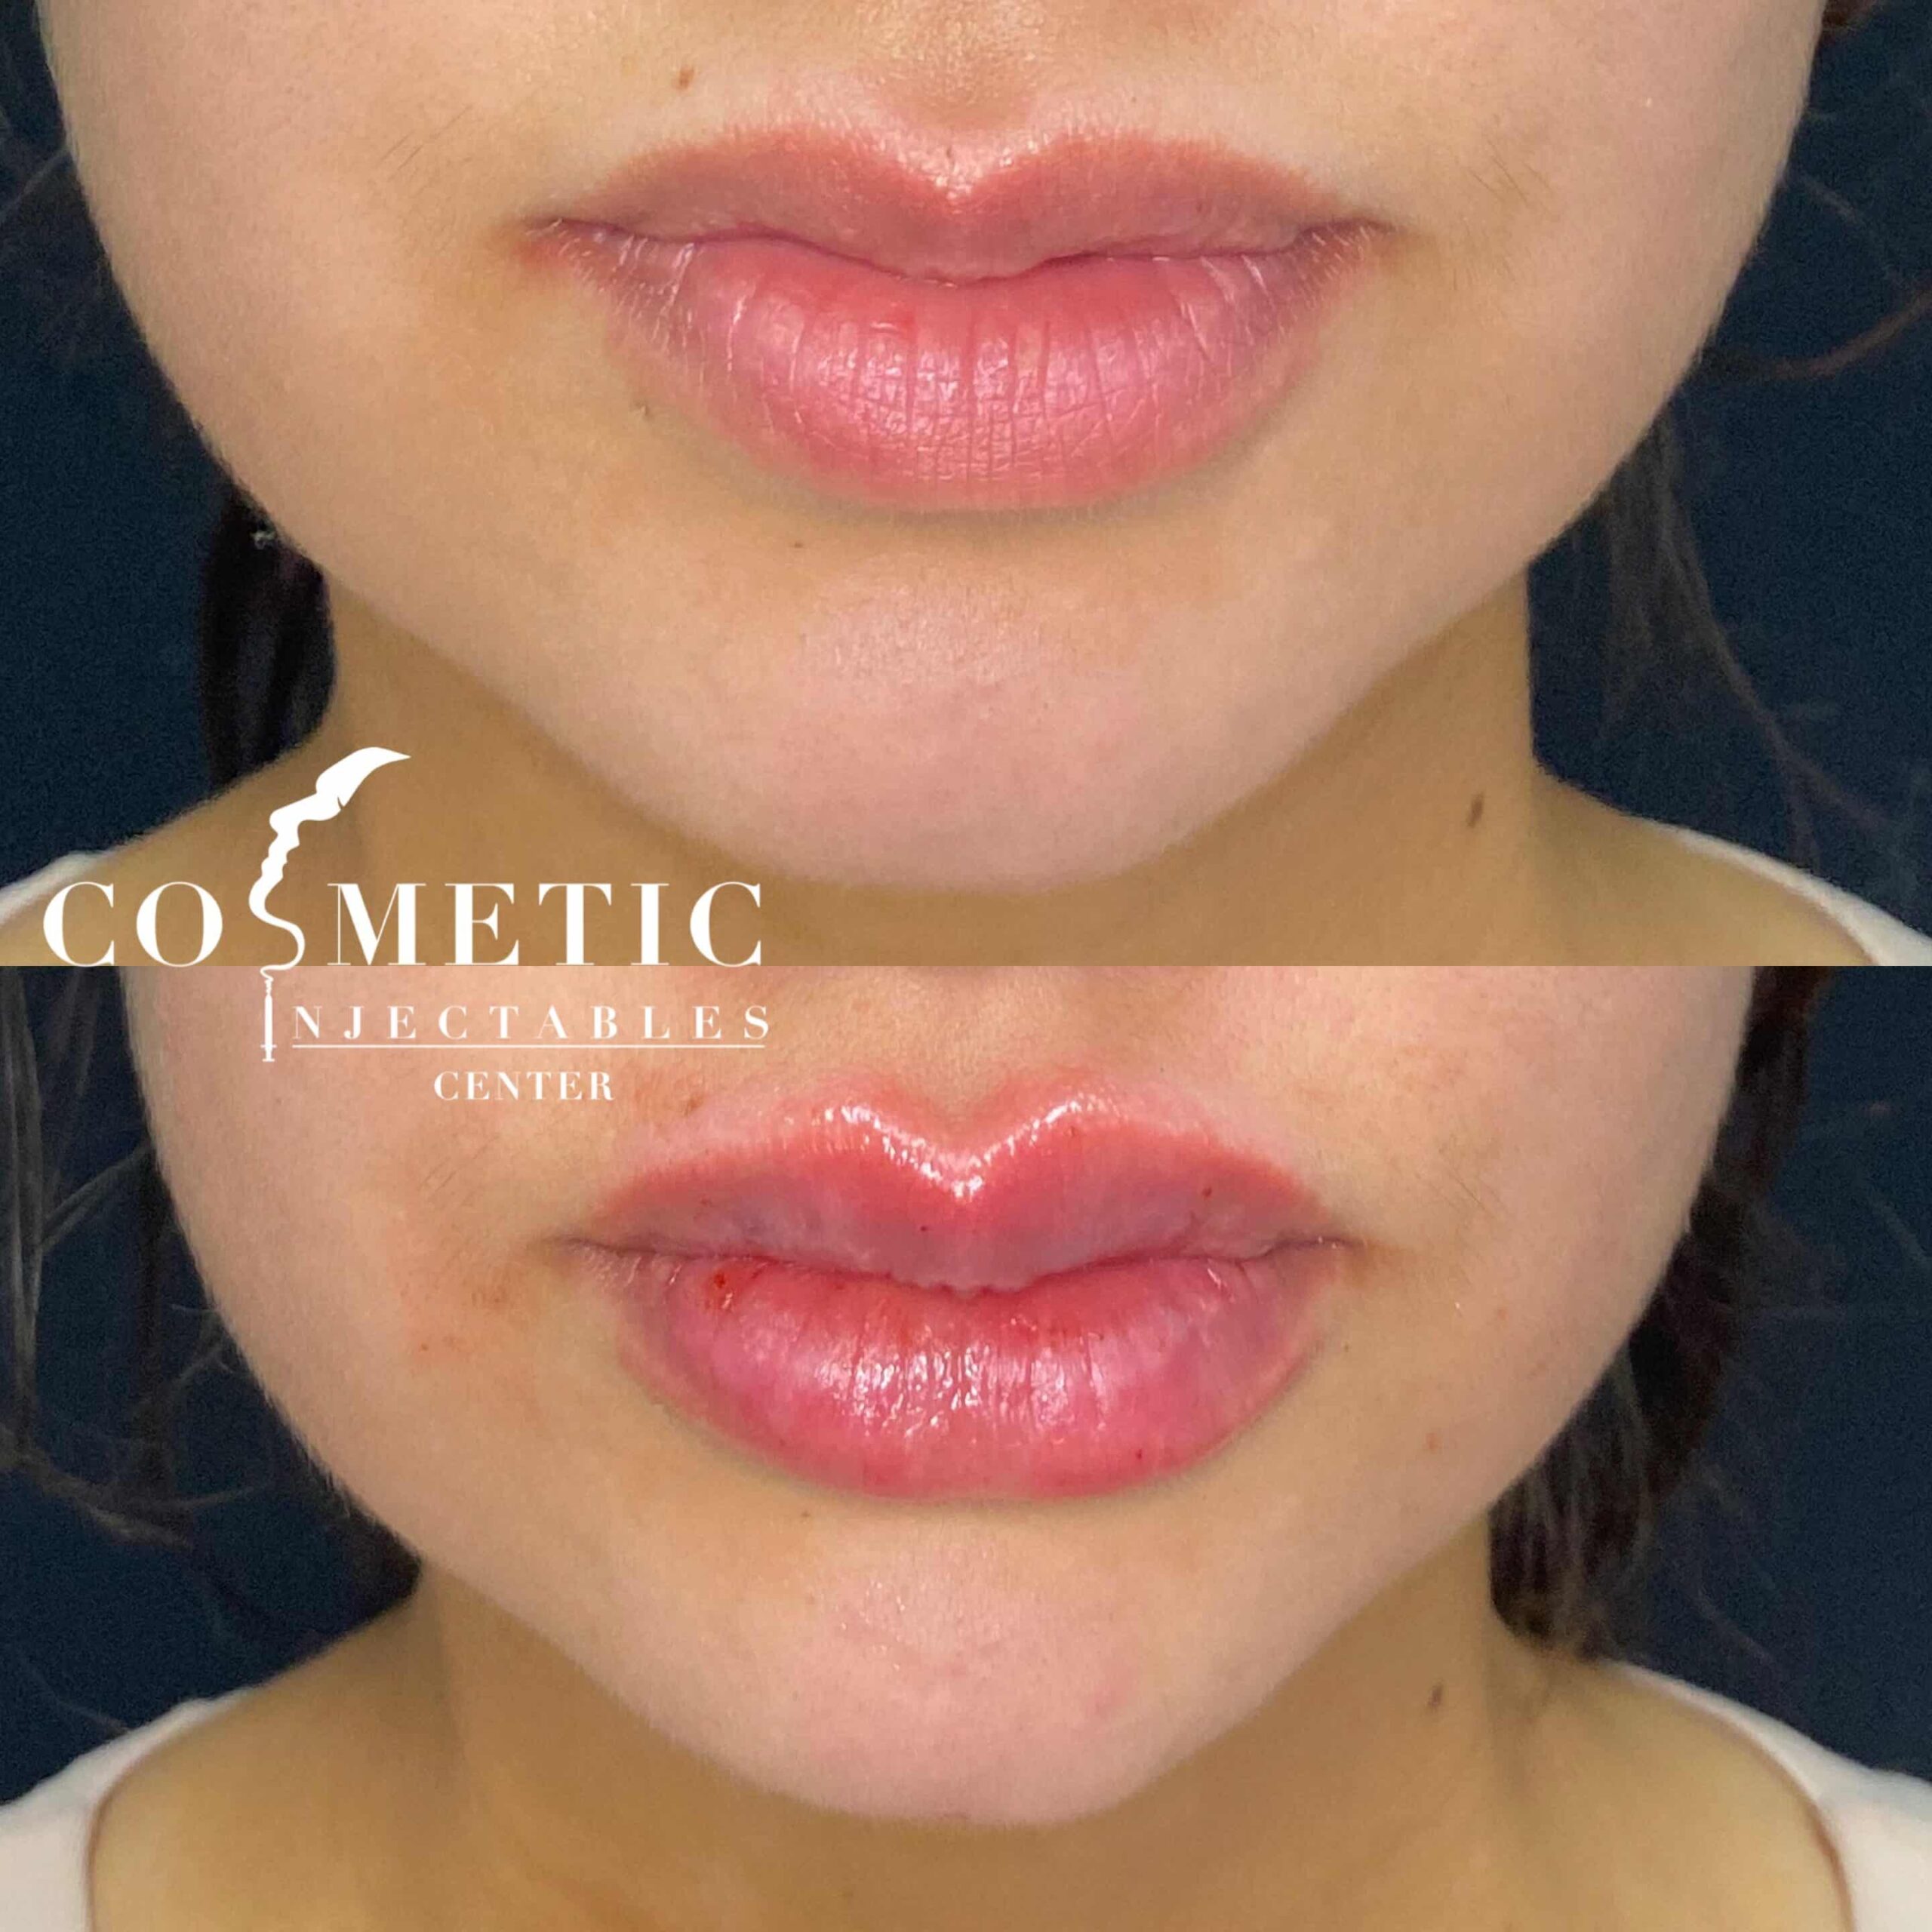 Before And After Lip Filler Effect On Patient, Highlighting The Enhancement In Lip Volume And Contour.